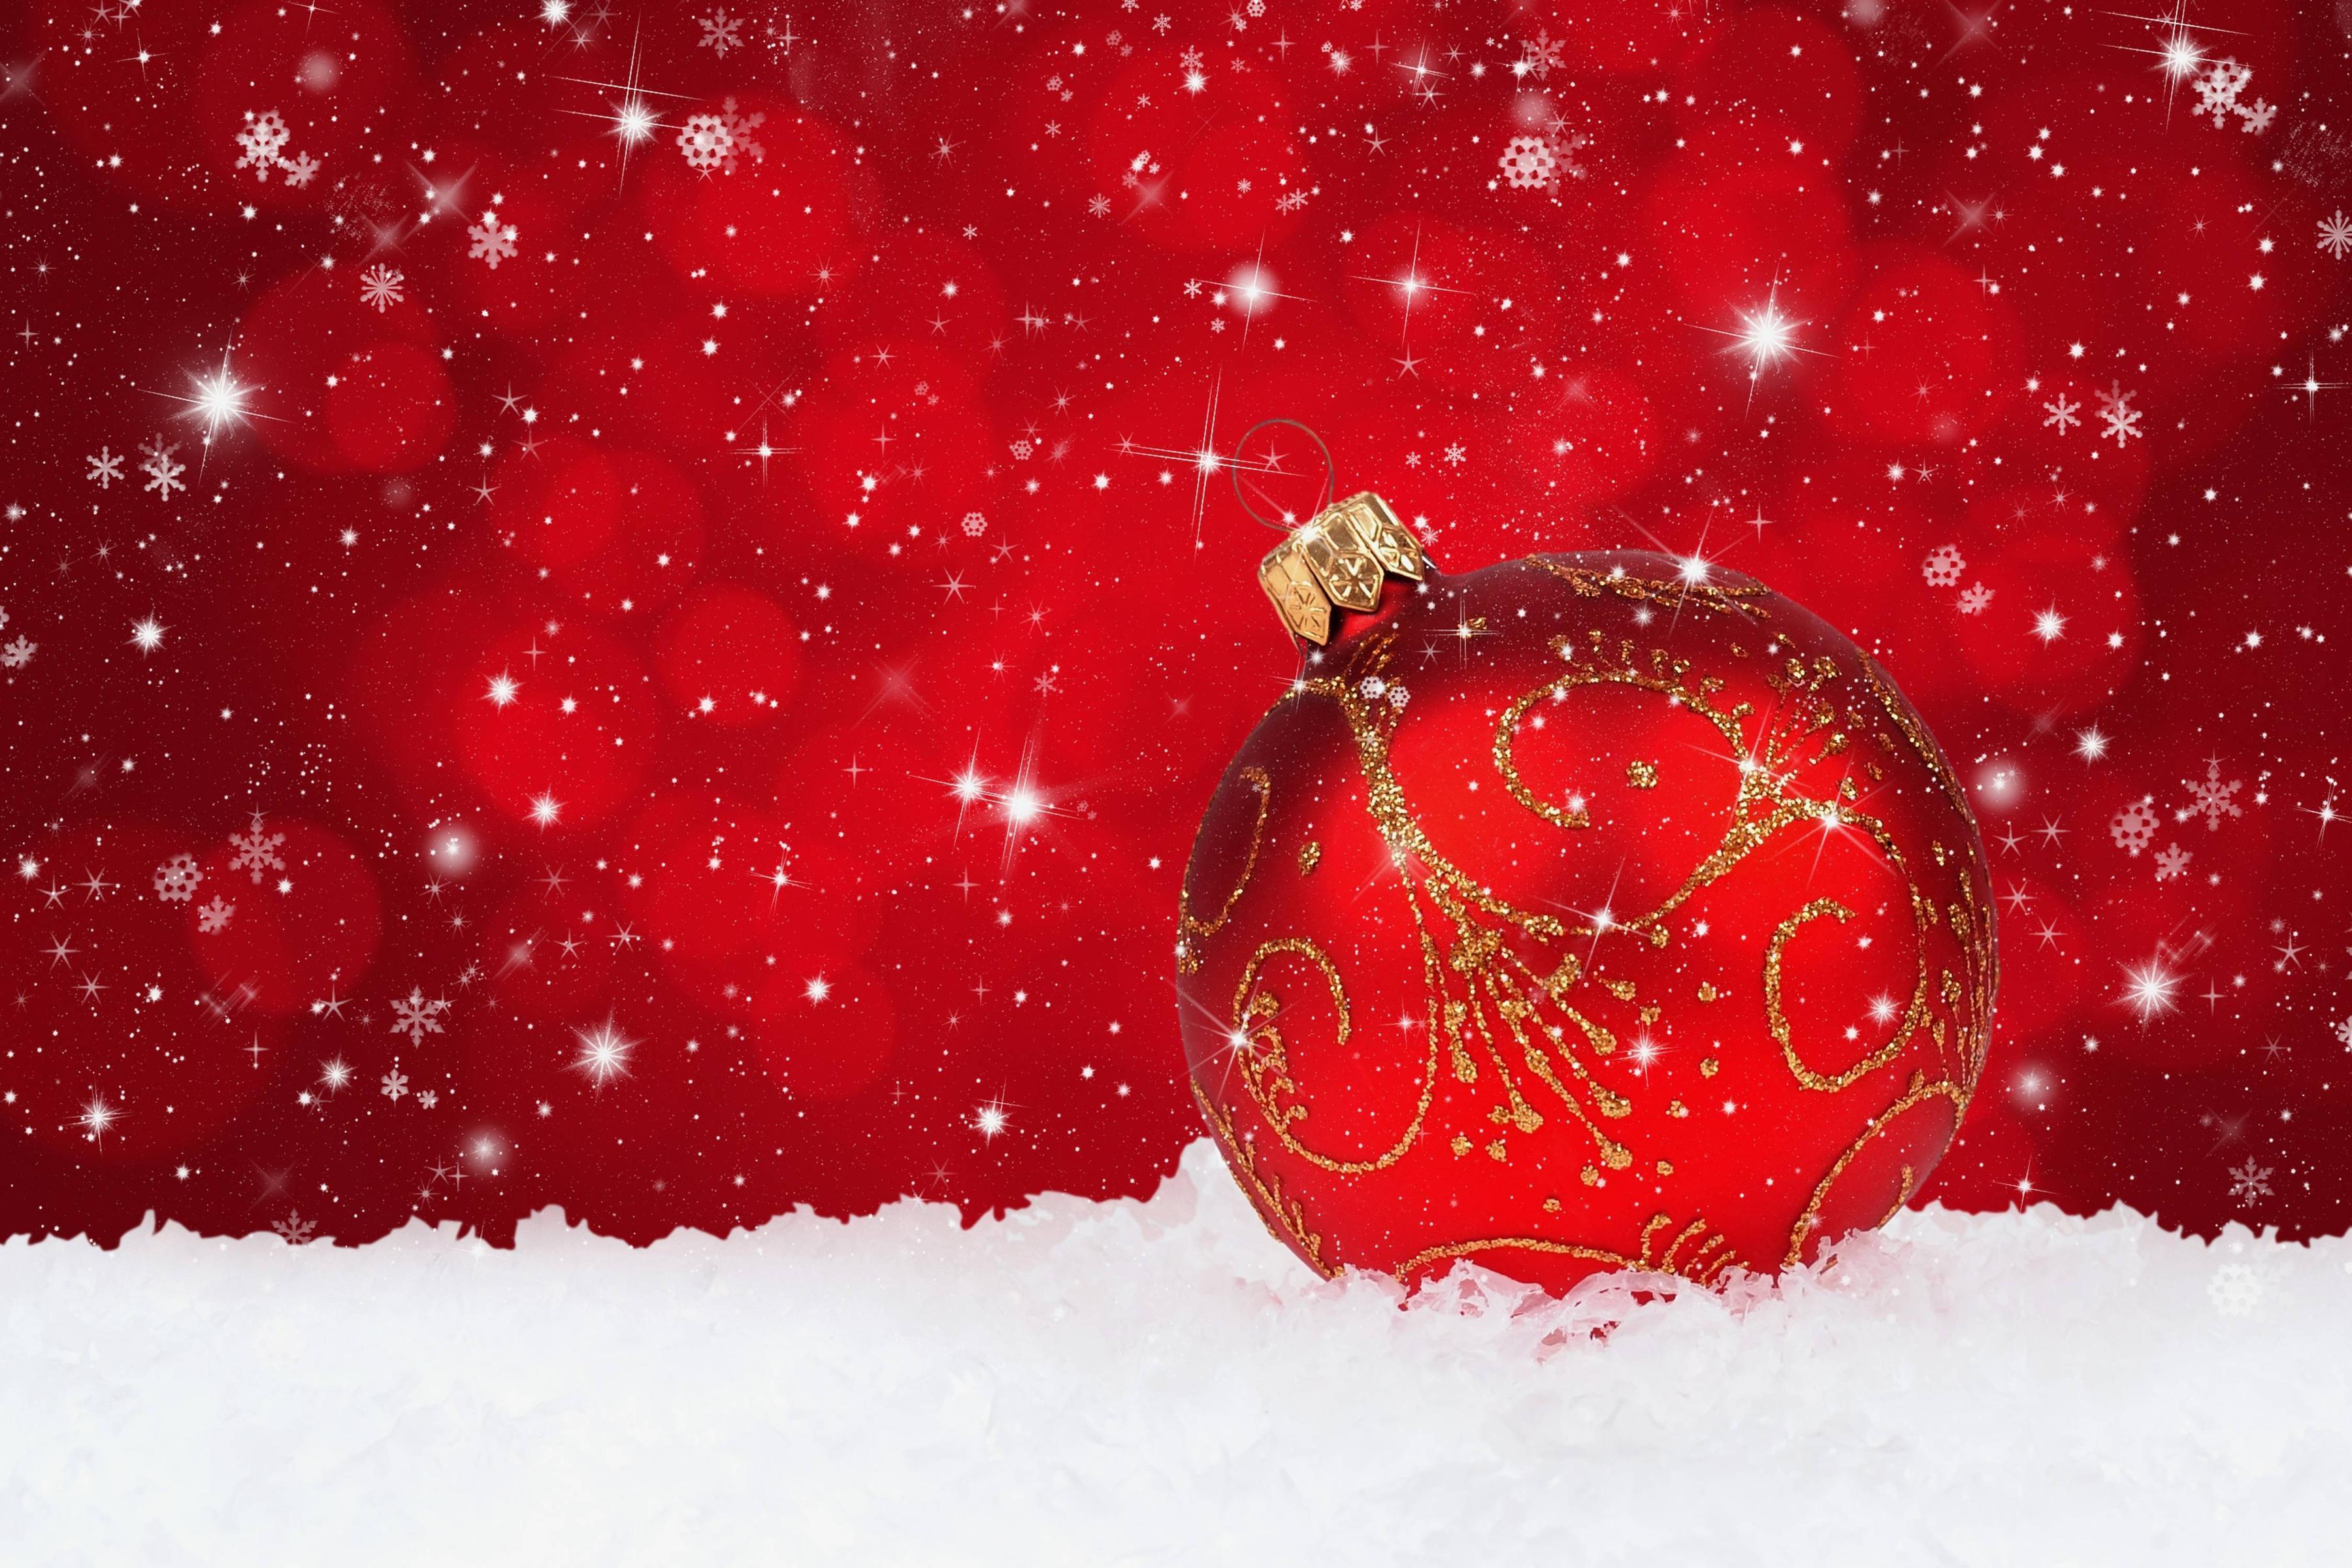 3600 x 2400 · jpeg - Red Christmas Backgrounds - Wallpaper Cave